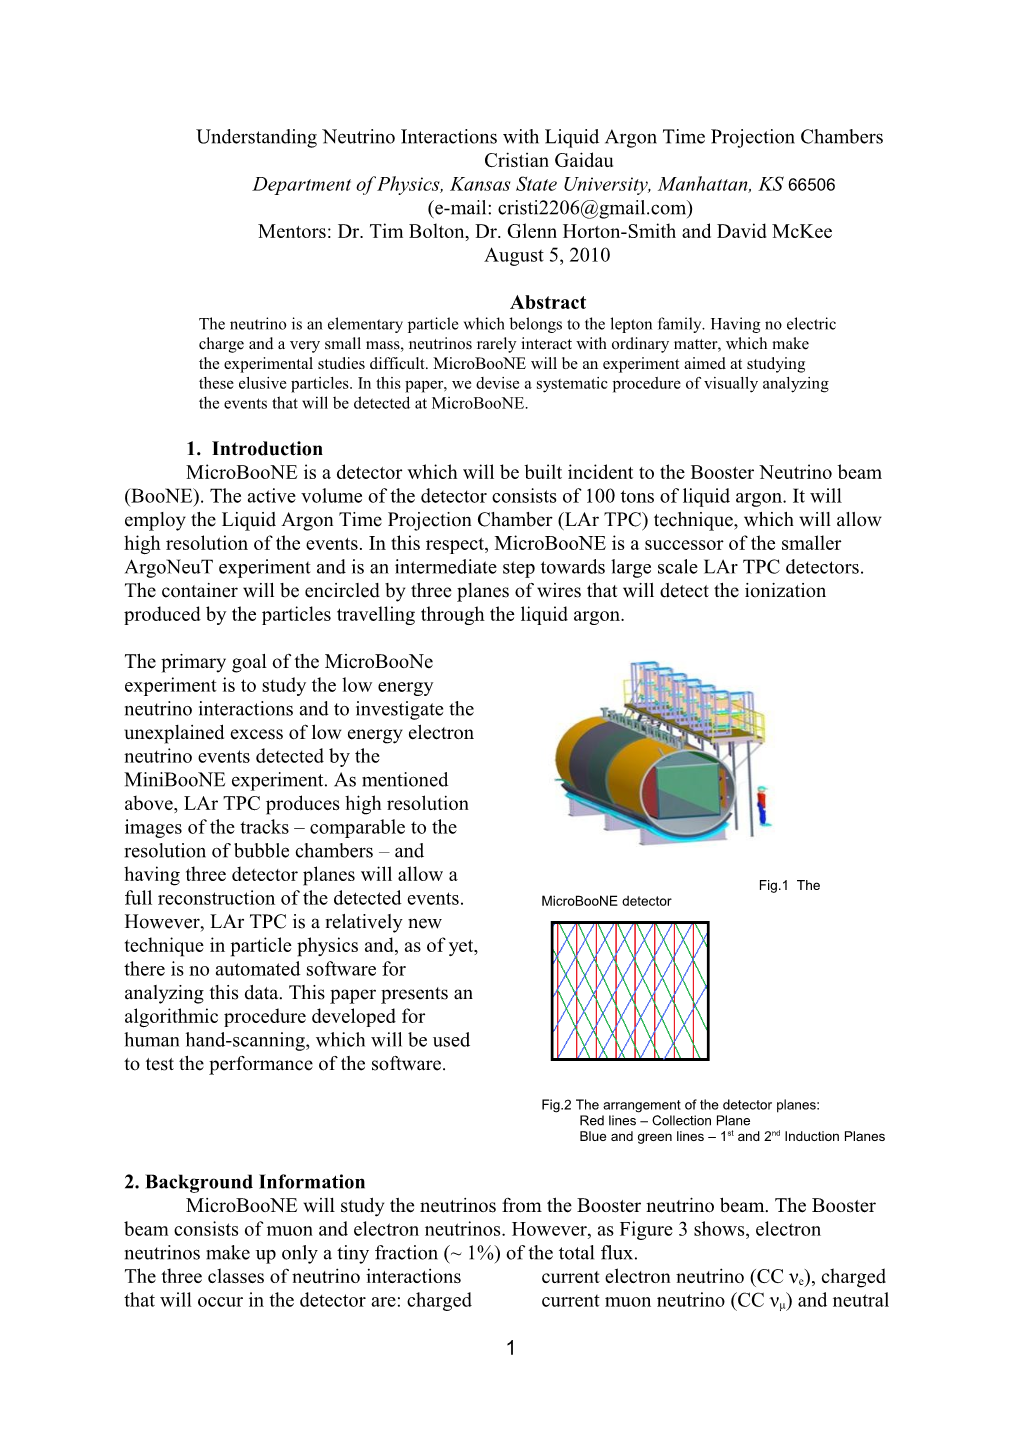 Understanding Neutrino Interactions with Liquid Argon Time Projection Chambers